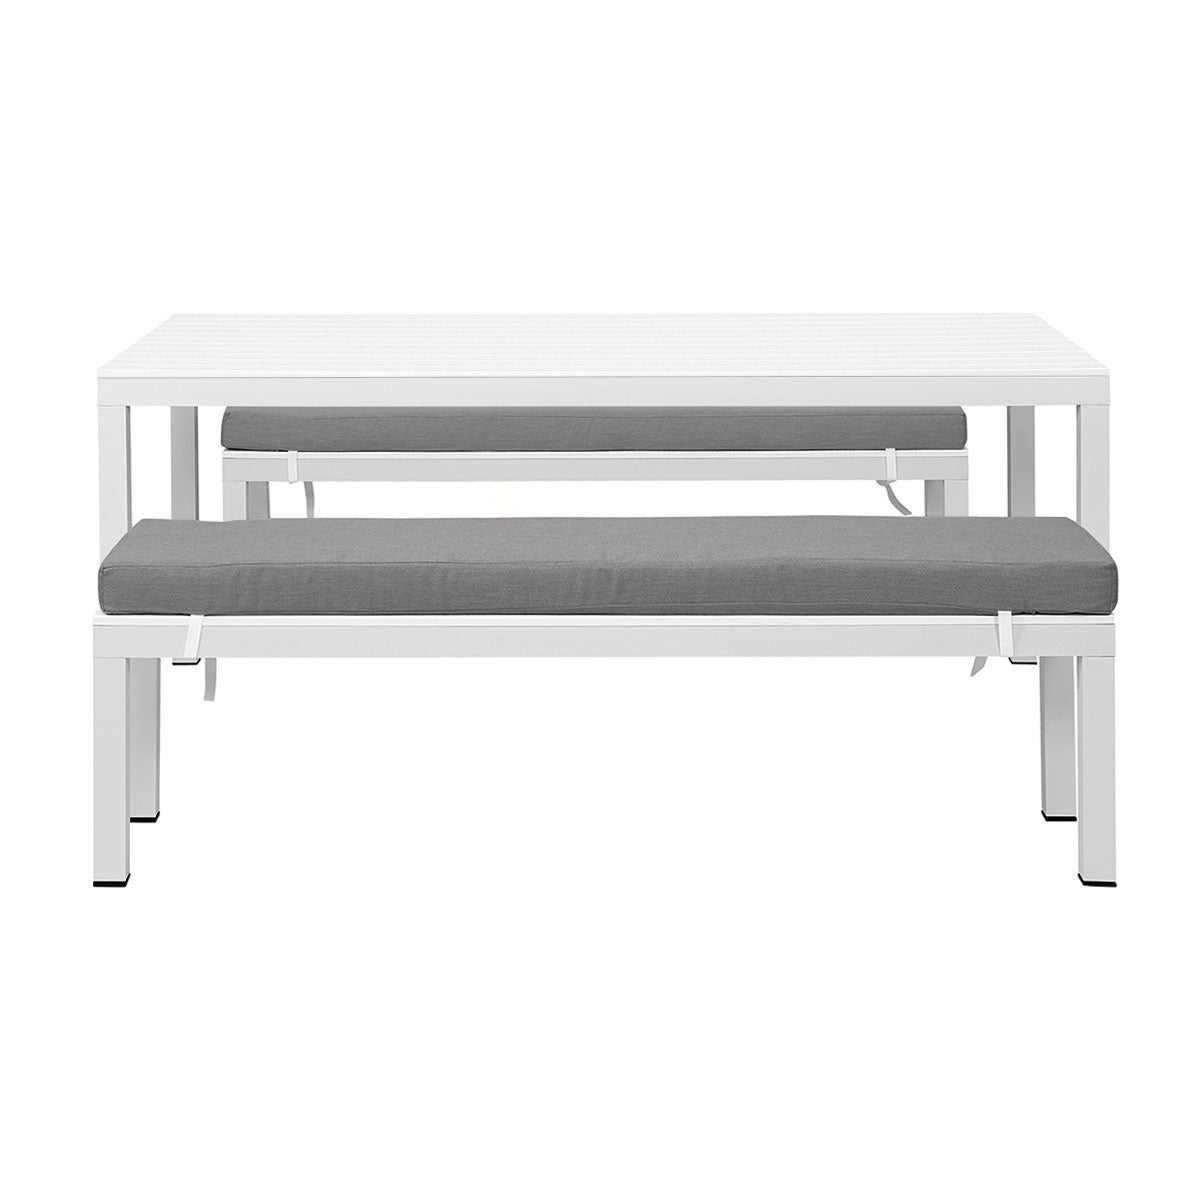 Manly 3 Piece White Aluminium Outdoor Bench Dining Set with Grey Cushion